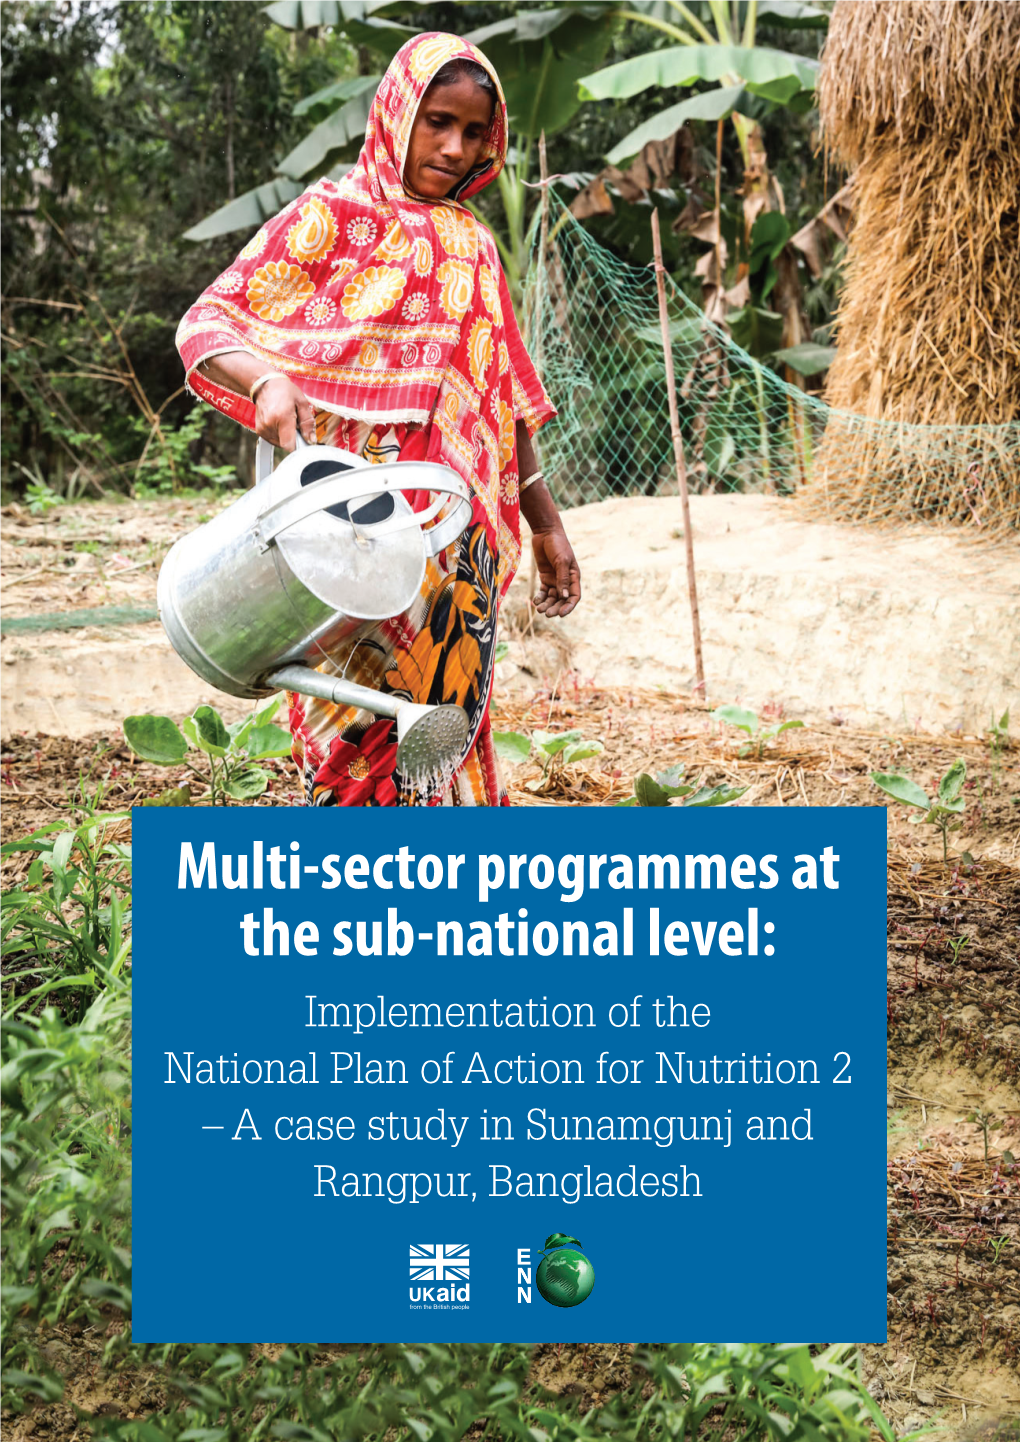 Bangladesh MSP at the Sub-National Level: Implementation of the National Plan of Action for Nutrition 2 – a Case Study in Sunamgunj and Rangpur, Bangladesh